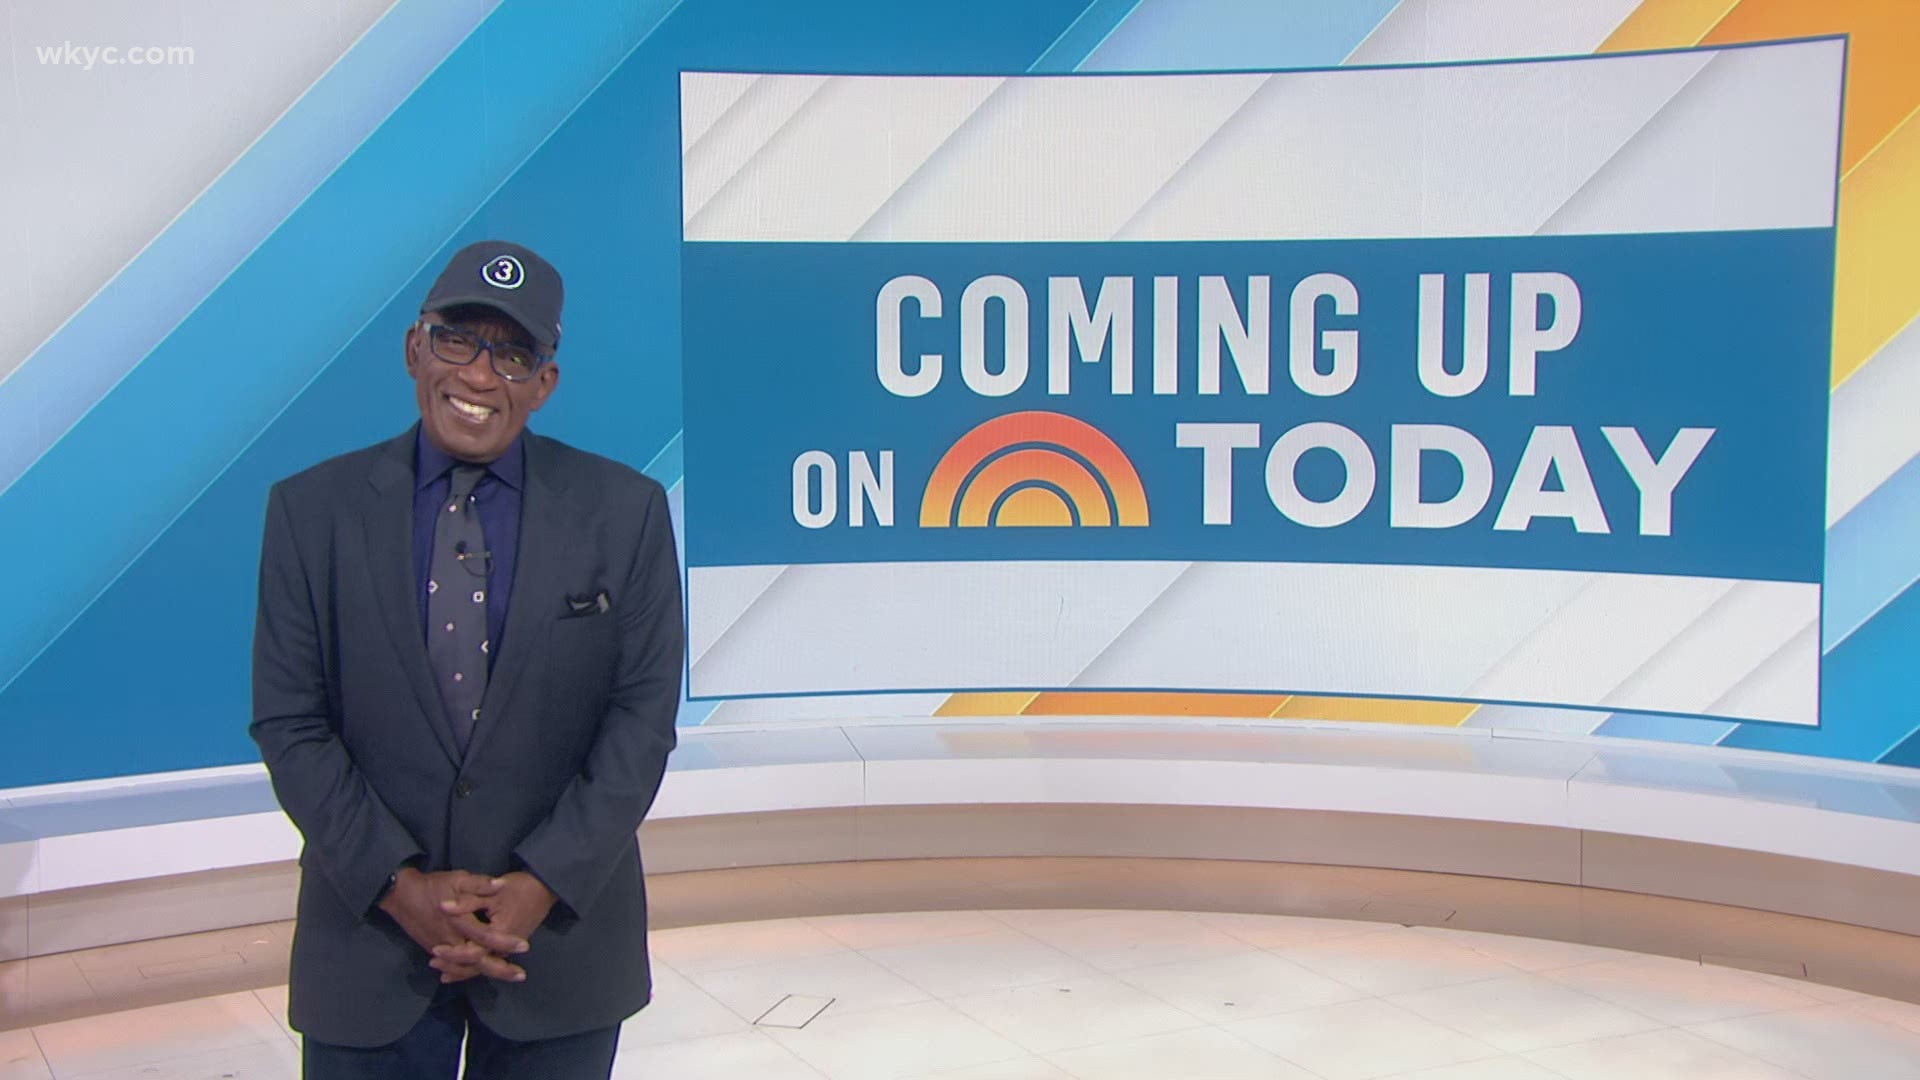 Al Roker is ready to put Cleveland back in the national spotlight with a week-long visit to our city on NBC's 'Today' for their 'Reopening America' series.